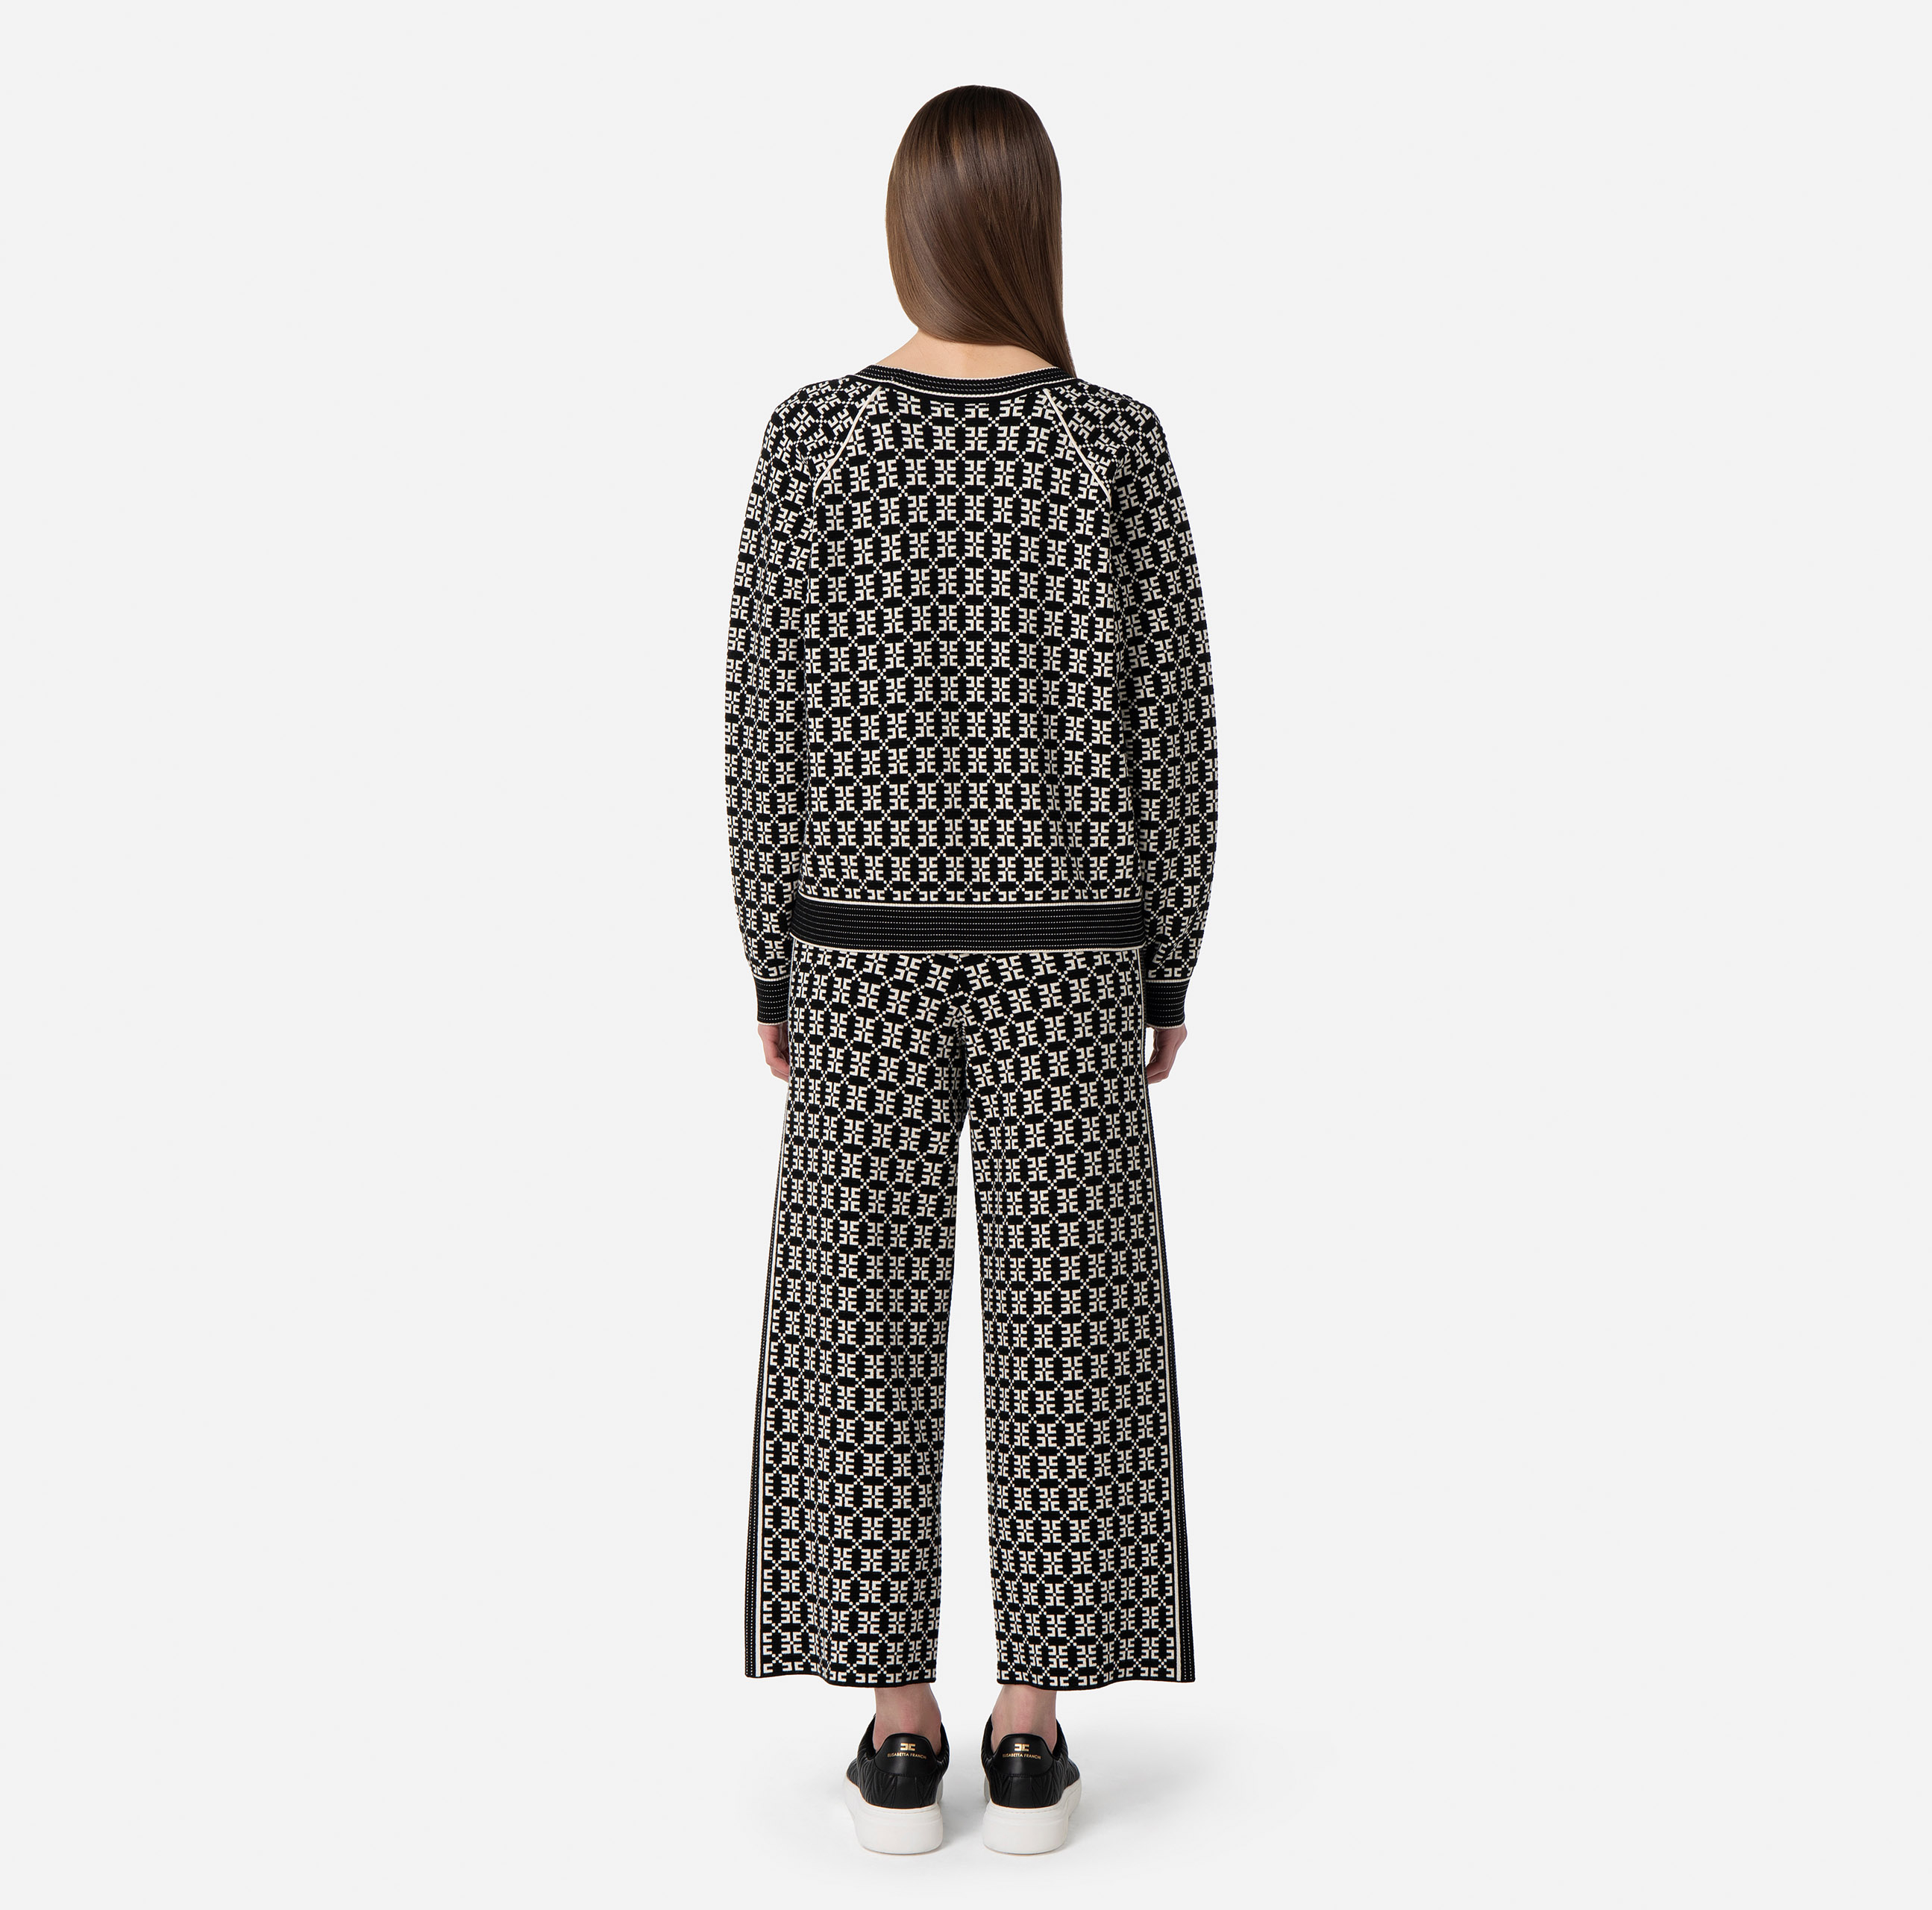 Palazzo trousers in jacquard knit fabric with logo - Elisabetta Franchi